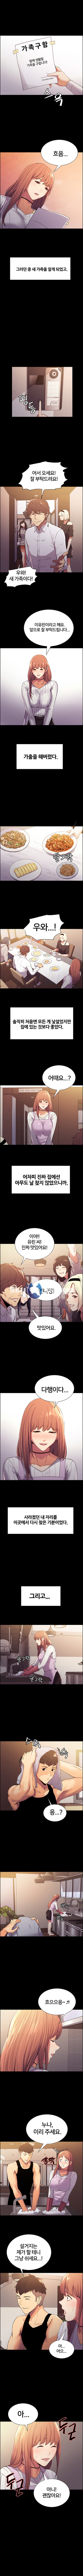 The Runaway Family Raw - Chapter 8 Page 5